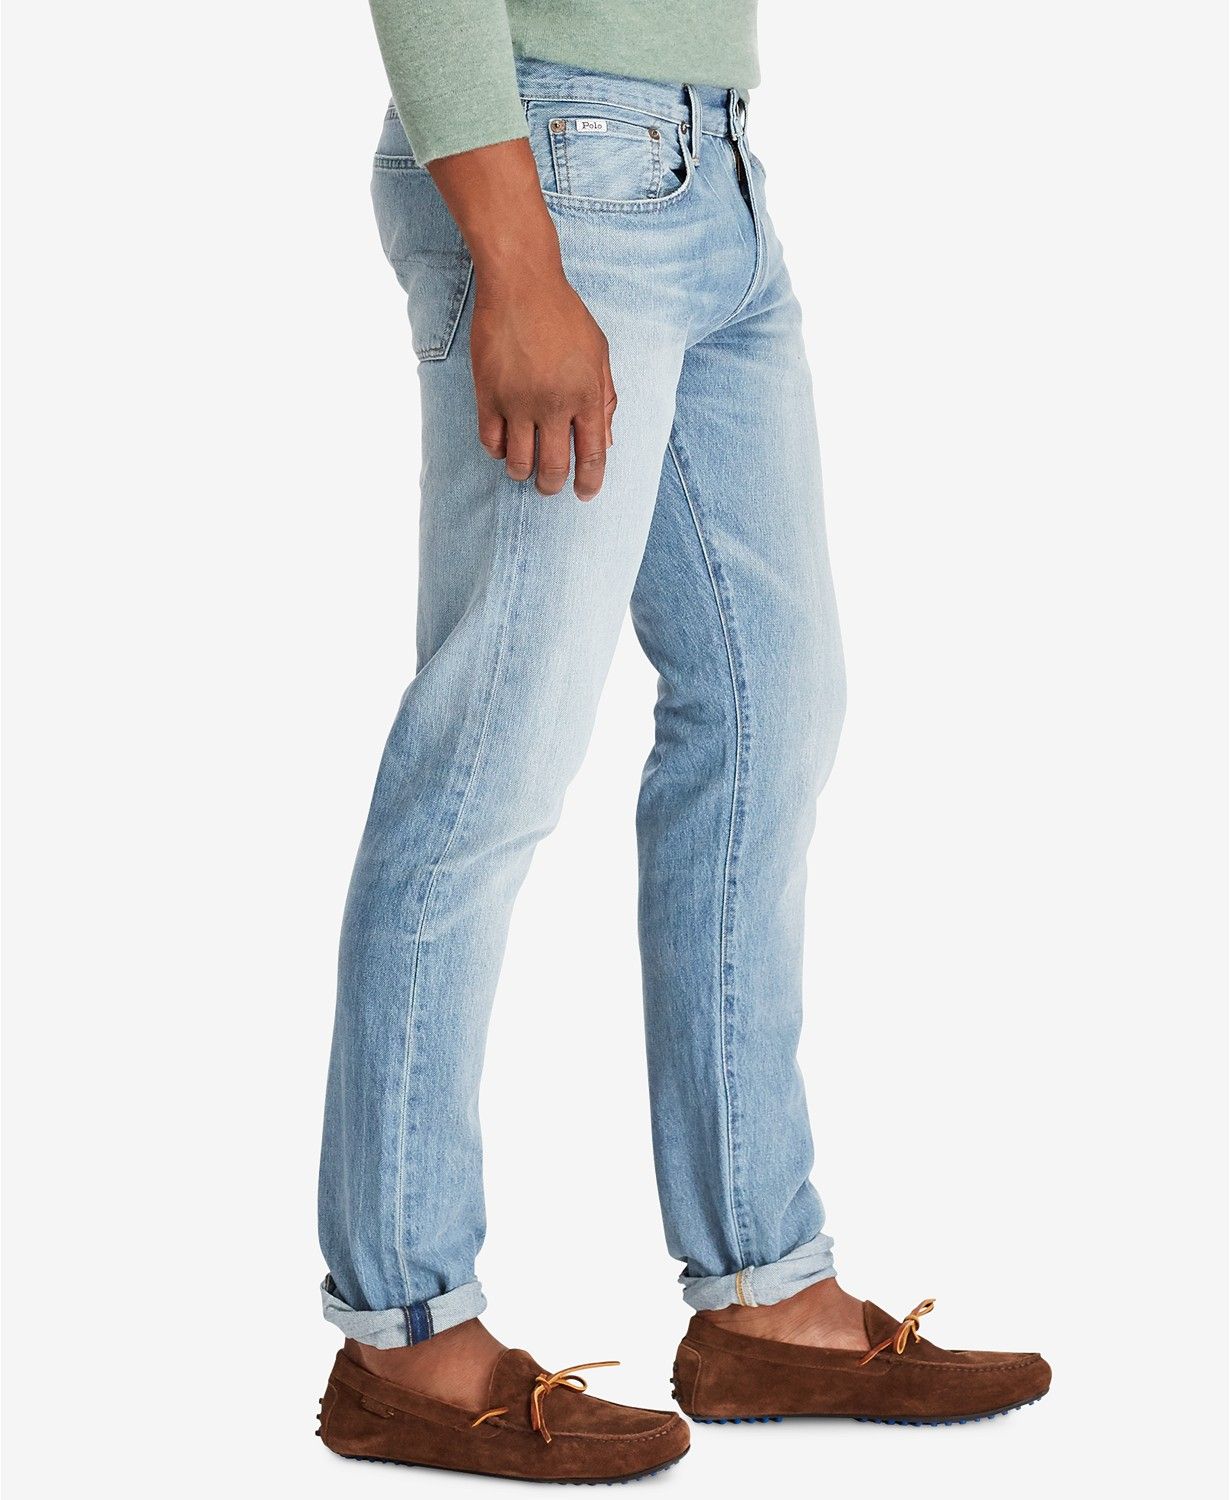 Polo Ralph Lauren Jeans on sale for $44 with Free Shipping - Cop Deals